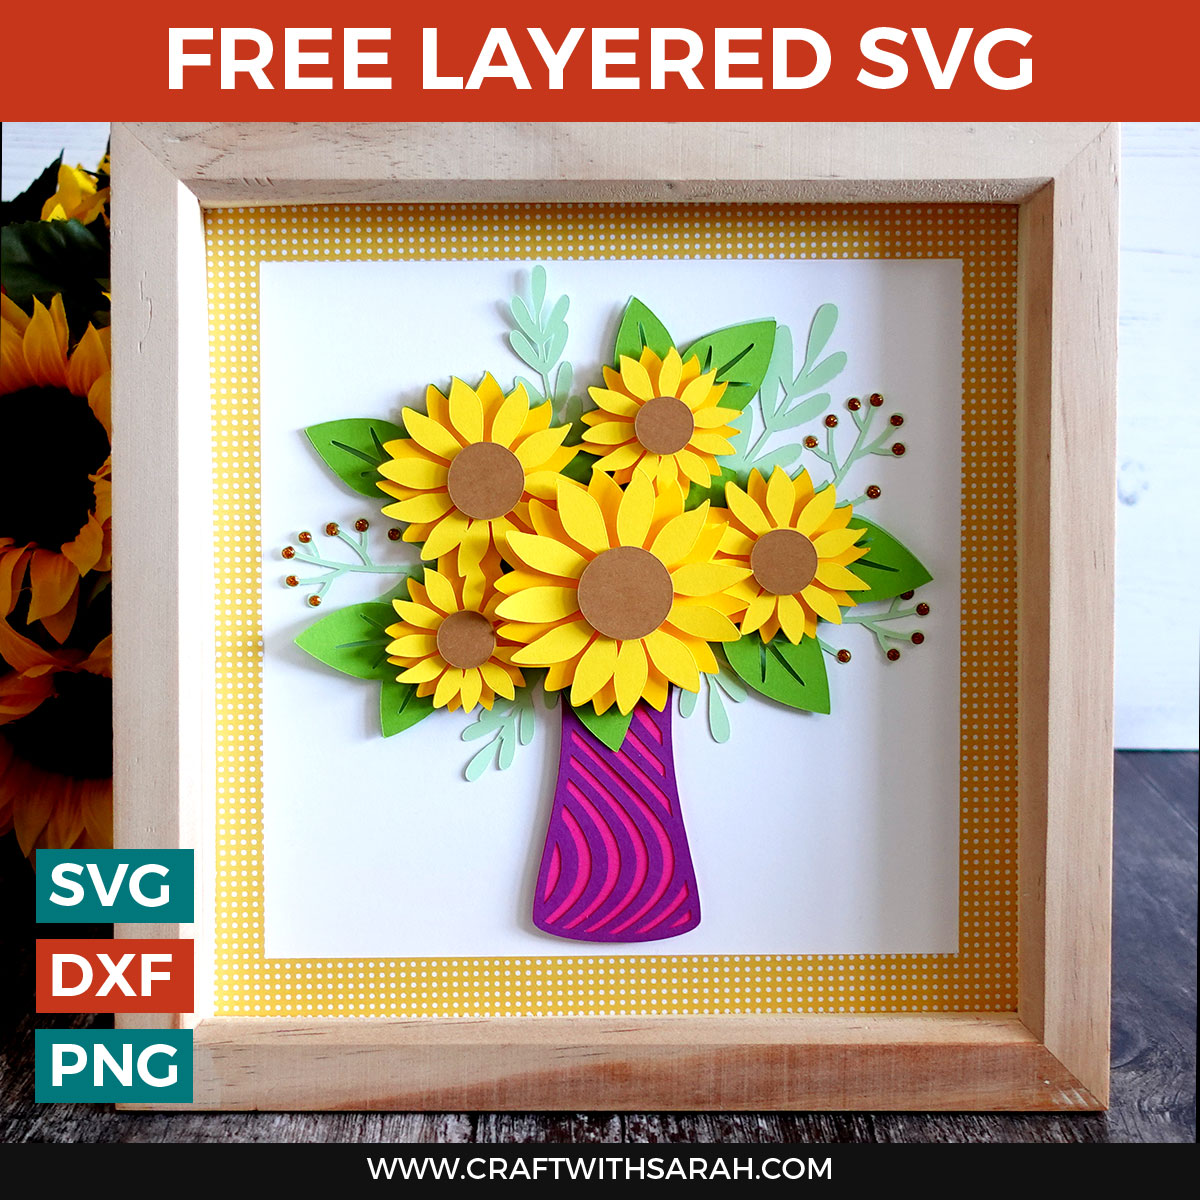 Download Sunflower Vase Free Layered Svg Craft With Sarah